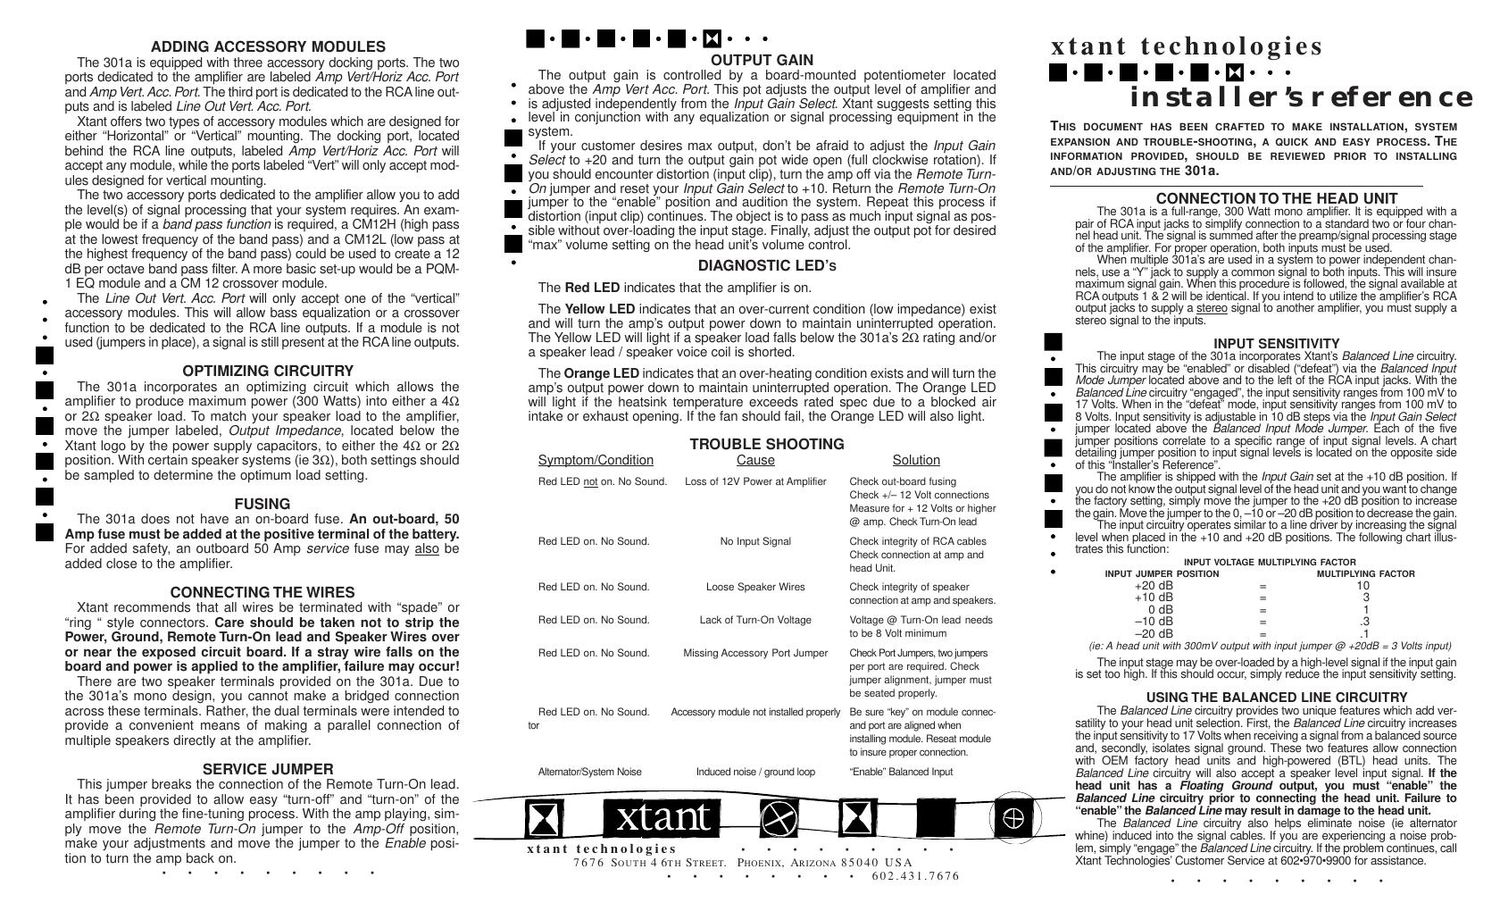 xtant 301 a owners manual